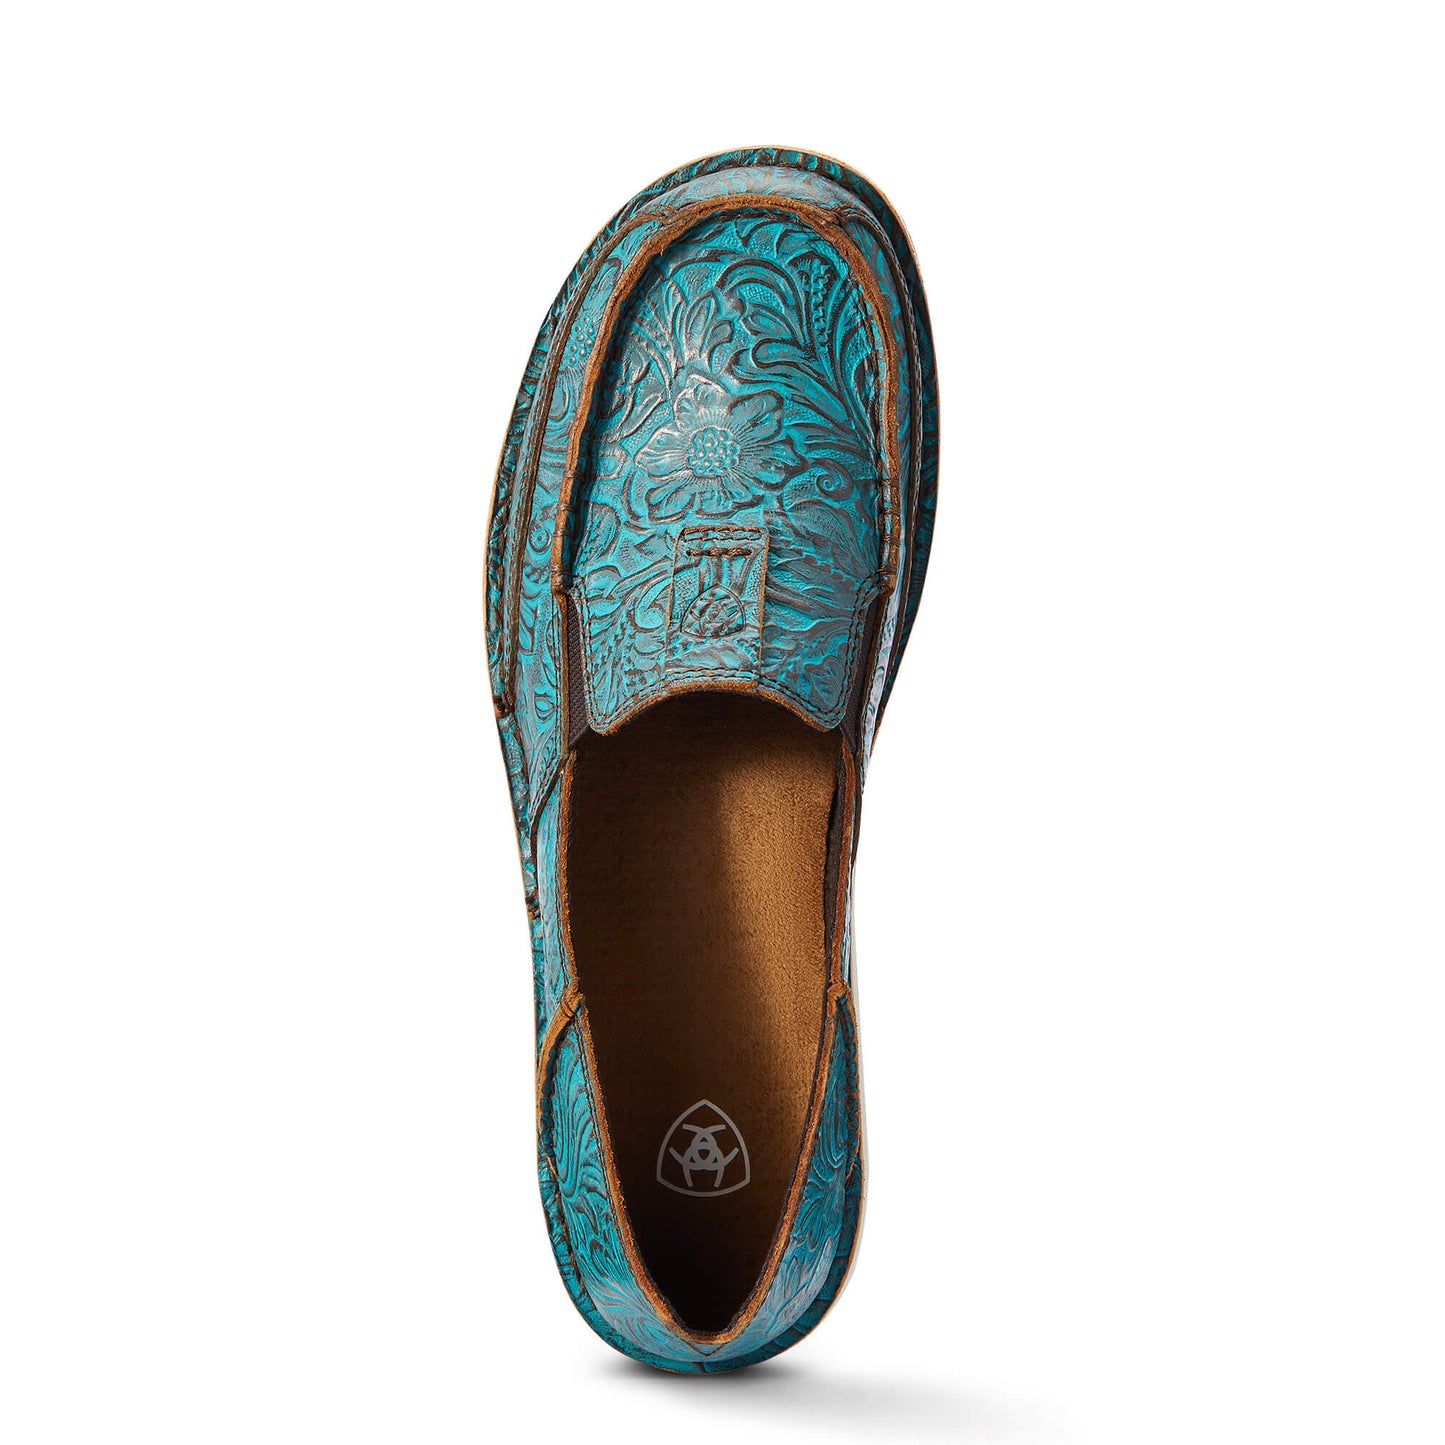 Ariat Turquoise Floral Emboss Cruiser